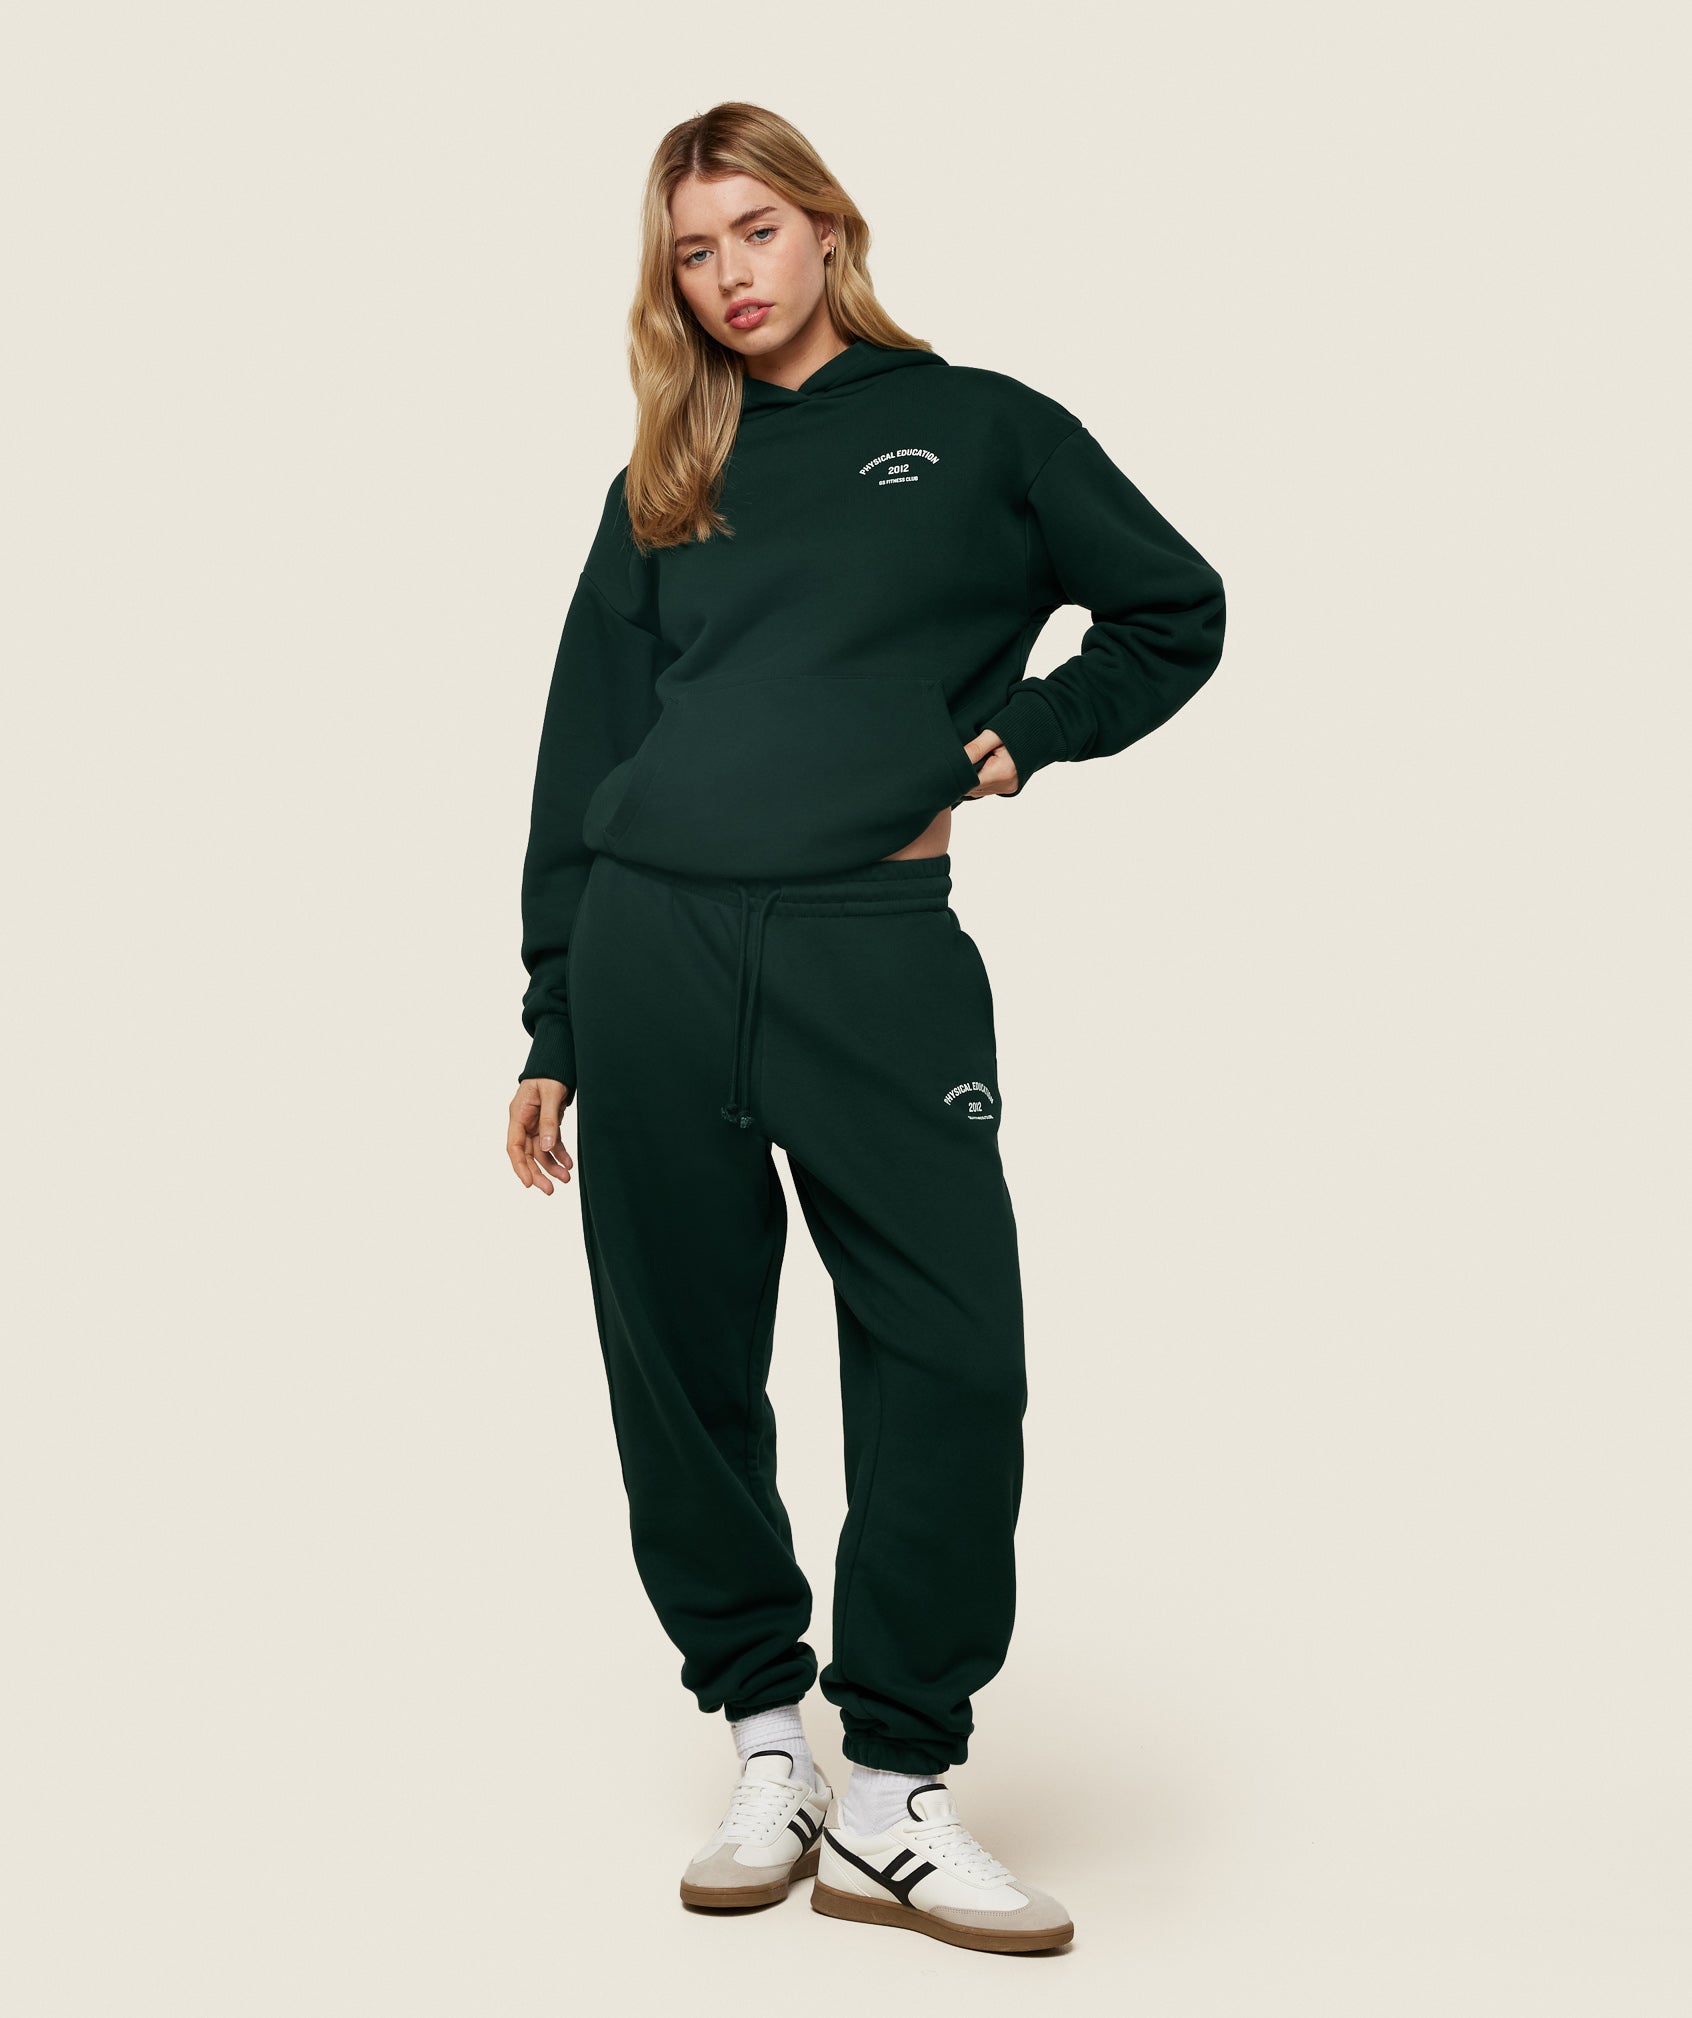 Phys Ed Graphic Sweatpants in Green - view 2